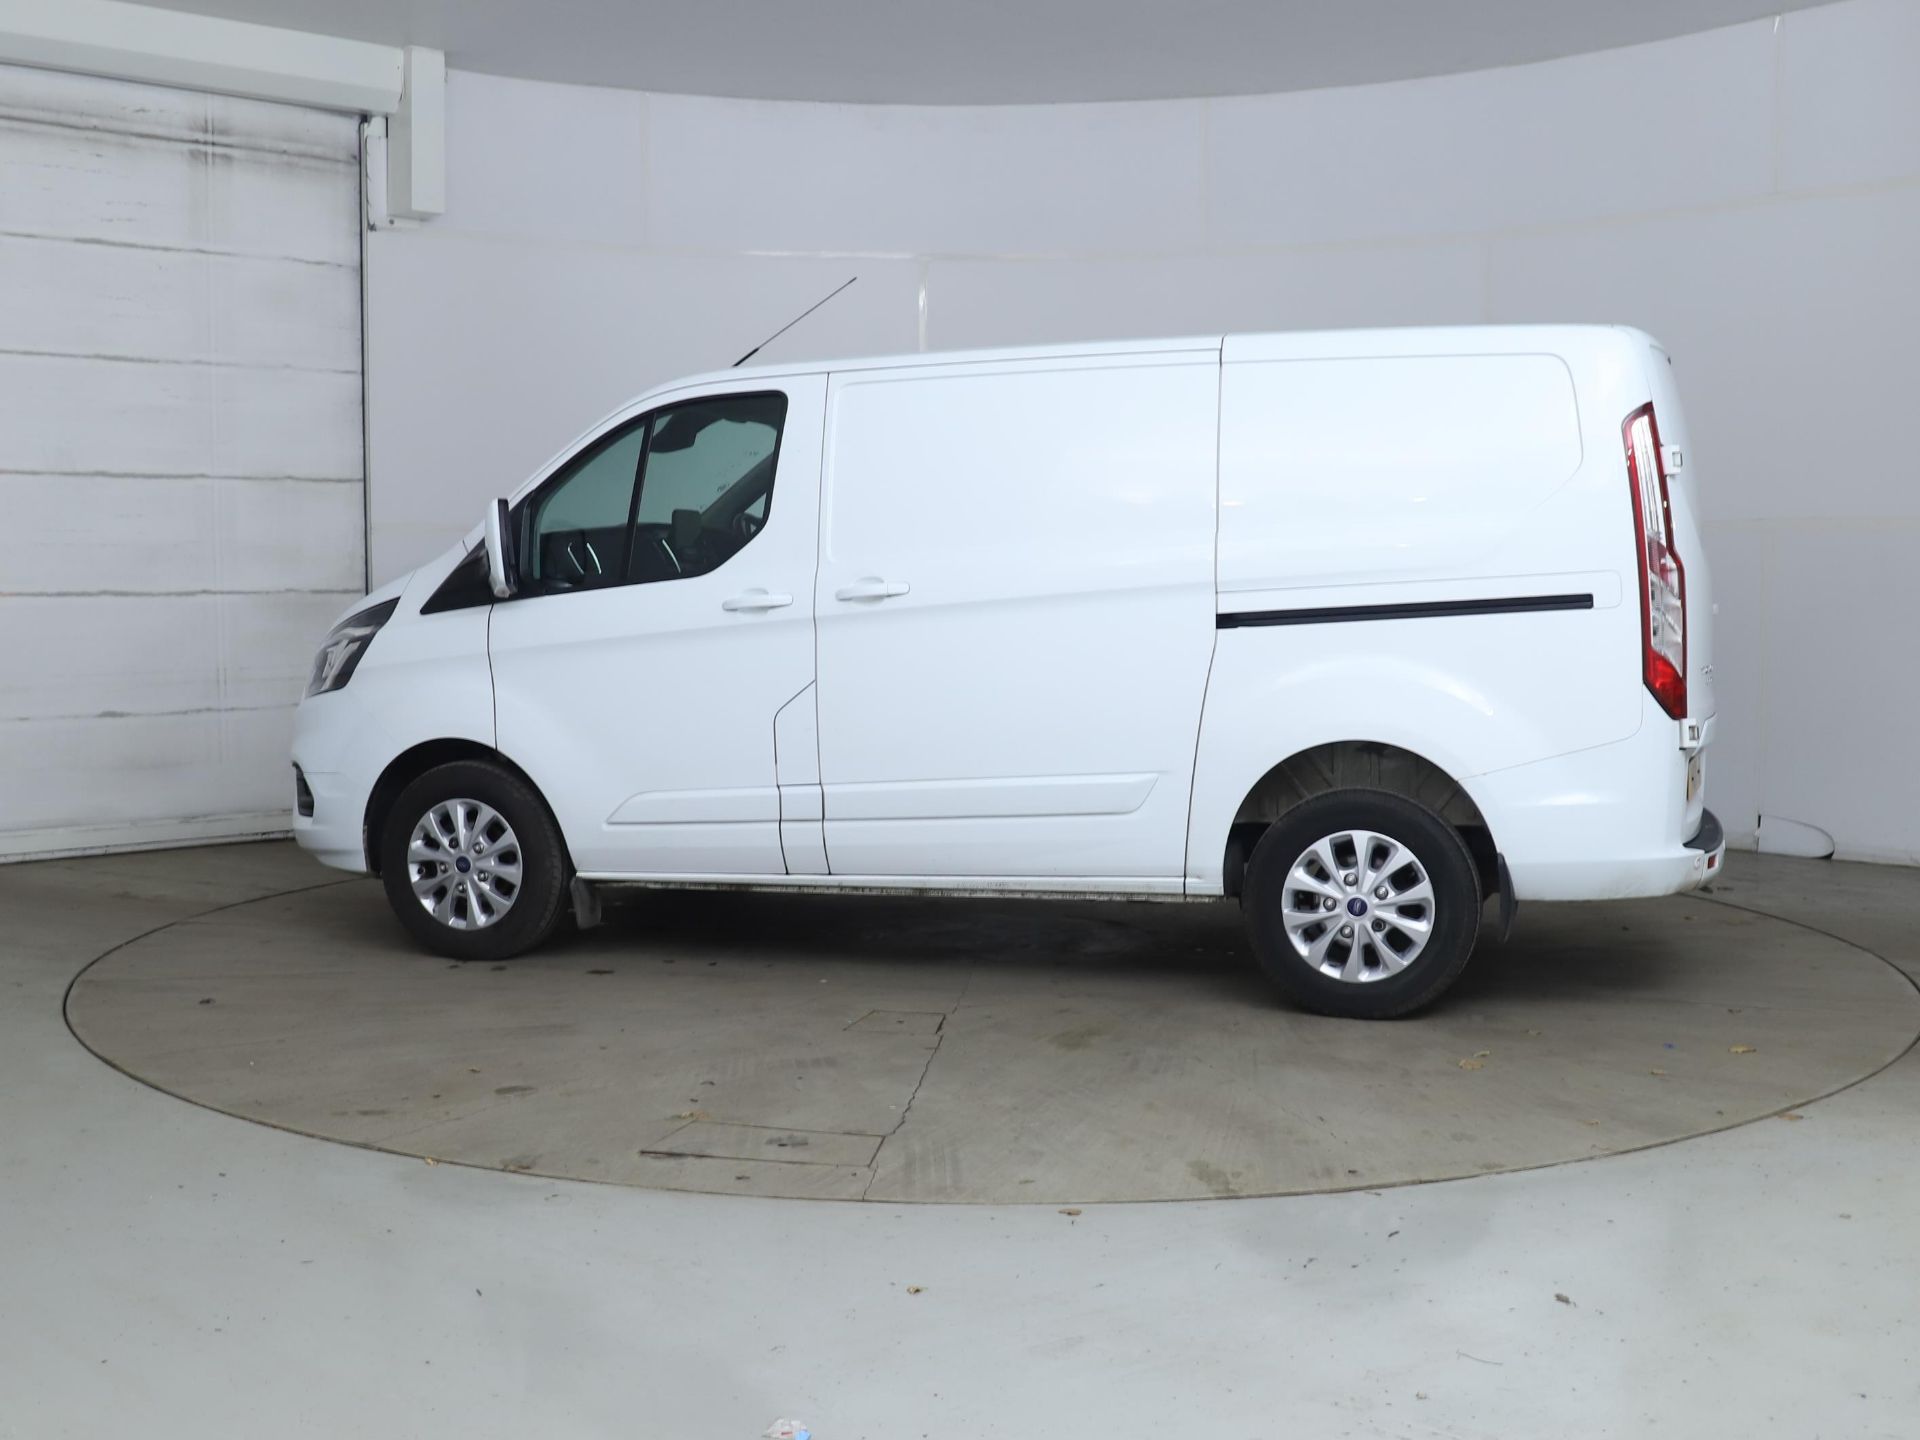 FORD TRANSIT "CUSTOM" LIMITED 2.0 TDCI (130) 21 REG - 1 OWNER - ONLY 46K MILES - AIR CON - ALLOYS - Image 2 of 12